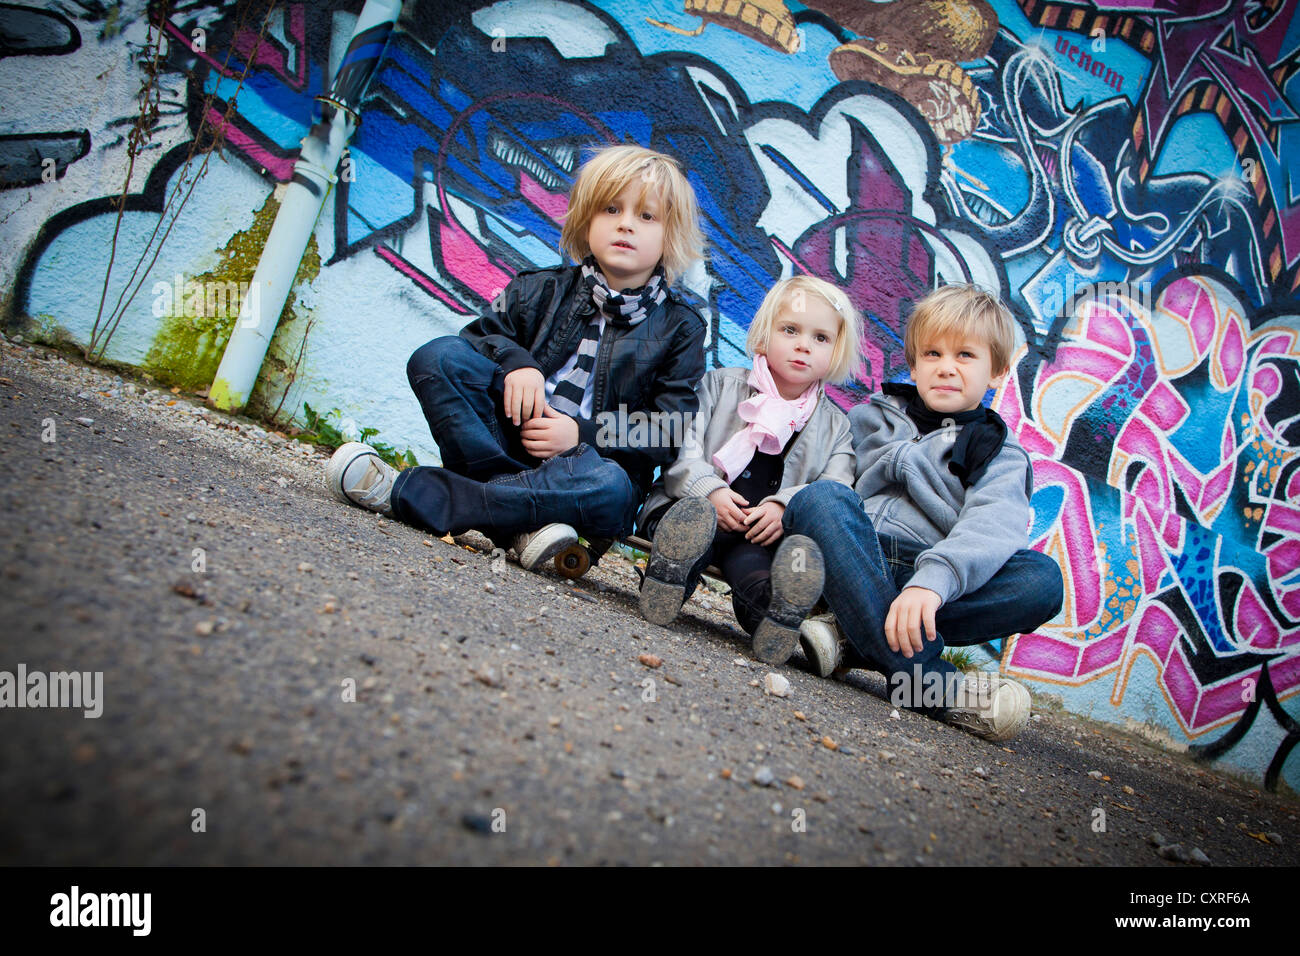 Siblings, 2, 5 and 7 years, sitting on a skateboard in front of a wall with graffiti Stock Photo